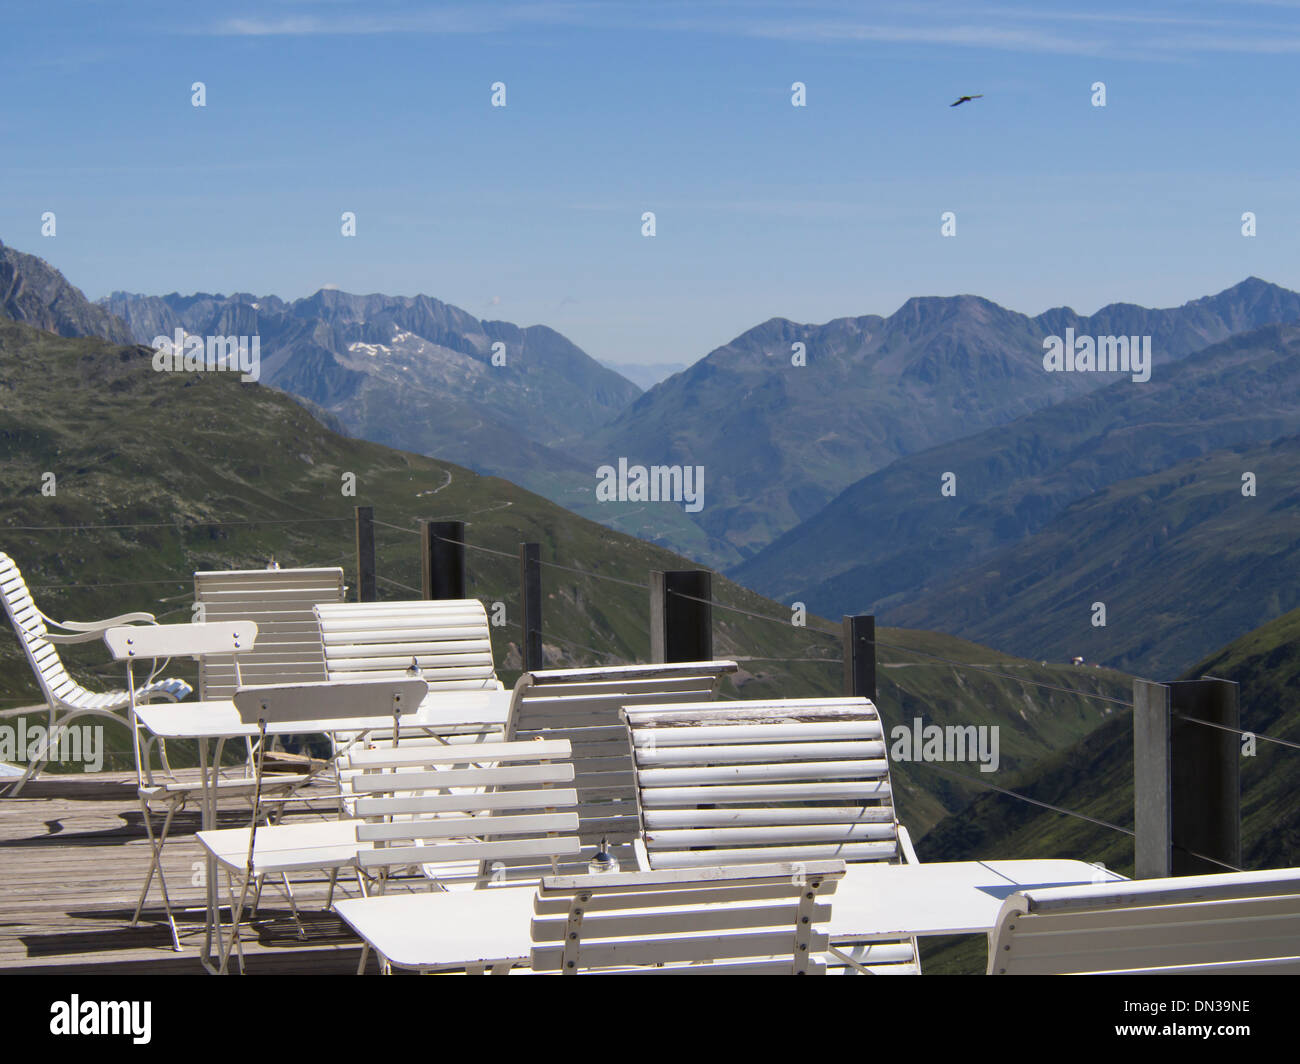 Hotel Furkablick, ca 2500 meter altitude high point of the Furkapass magnificent views terrace, table and chairs Switzerland Stock Photo